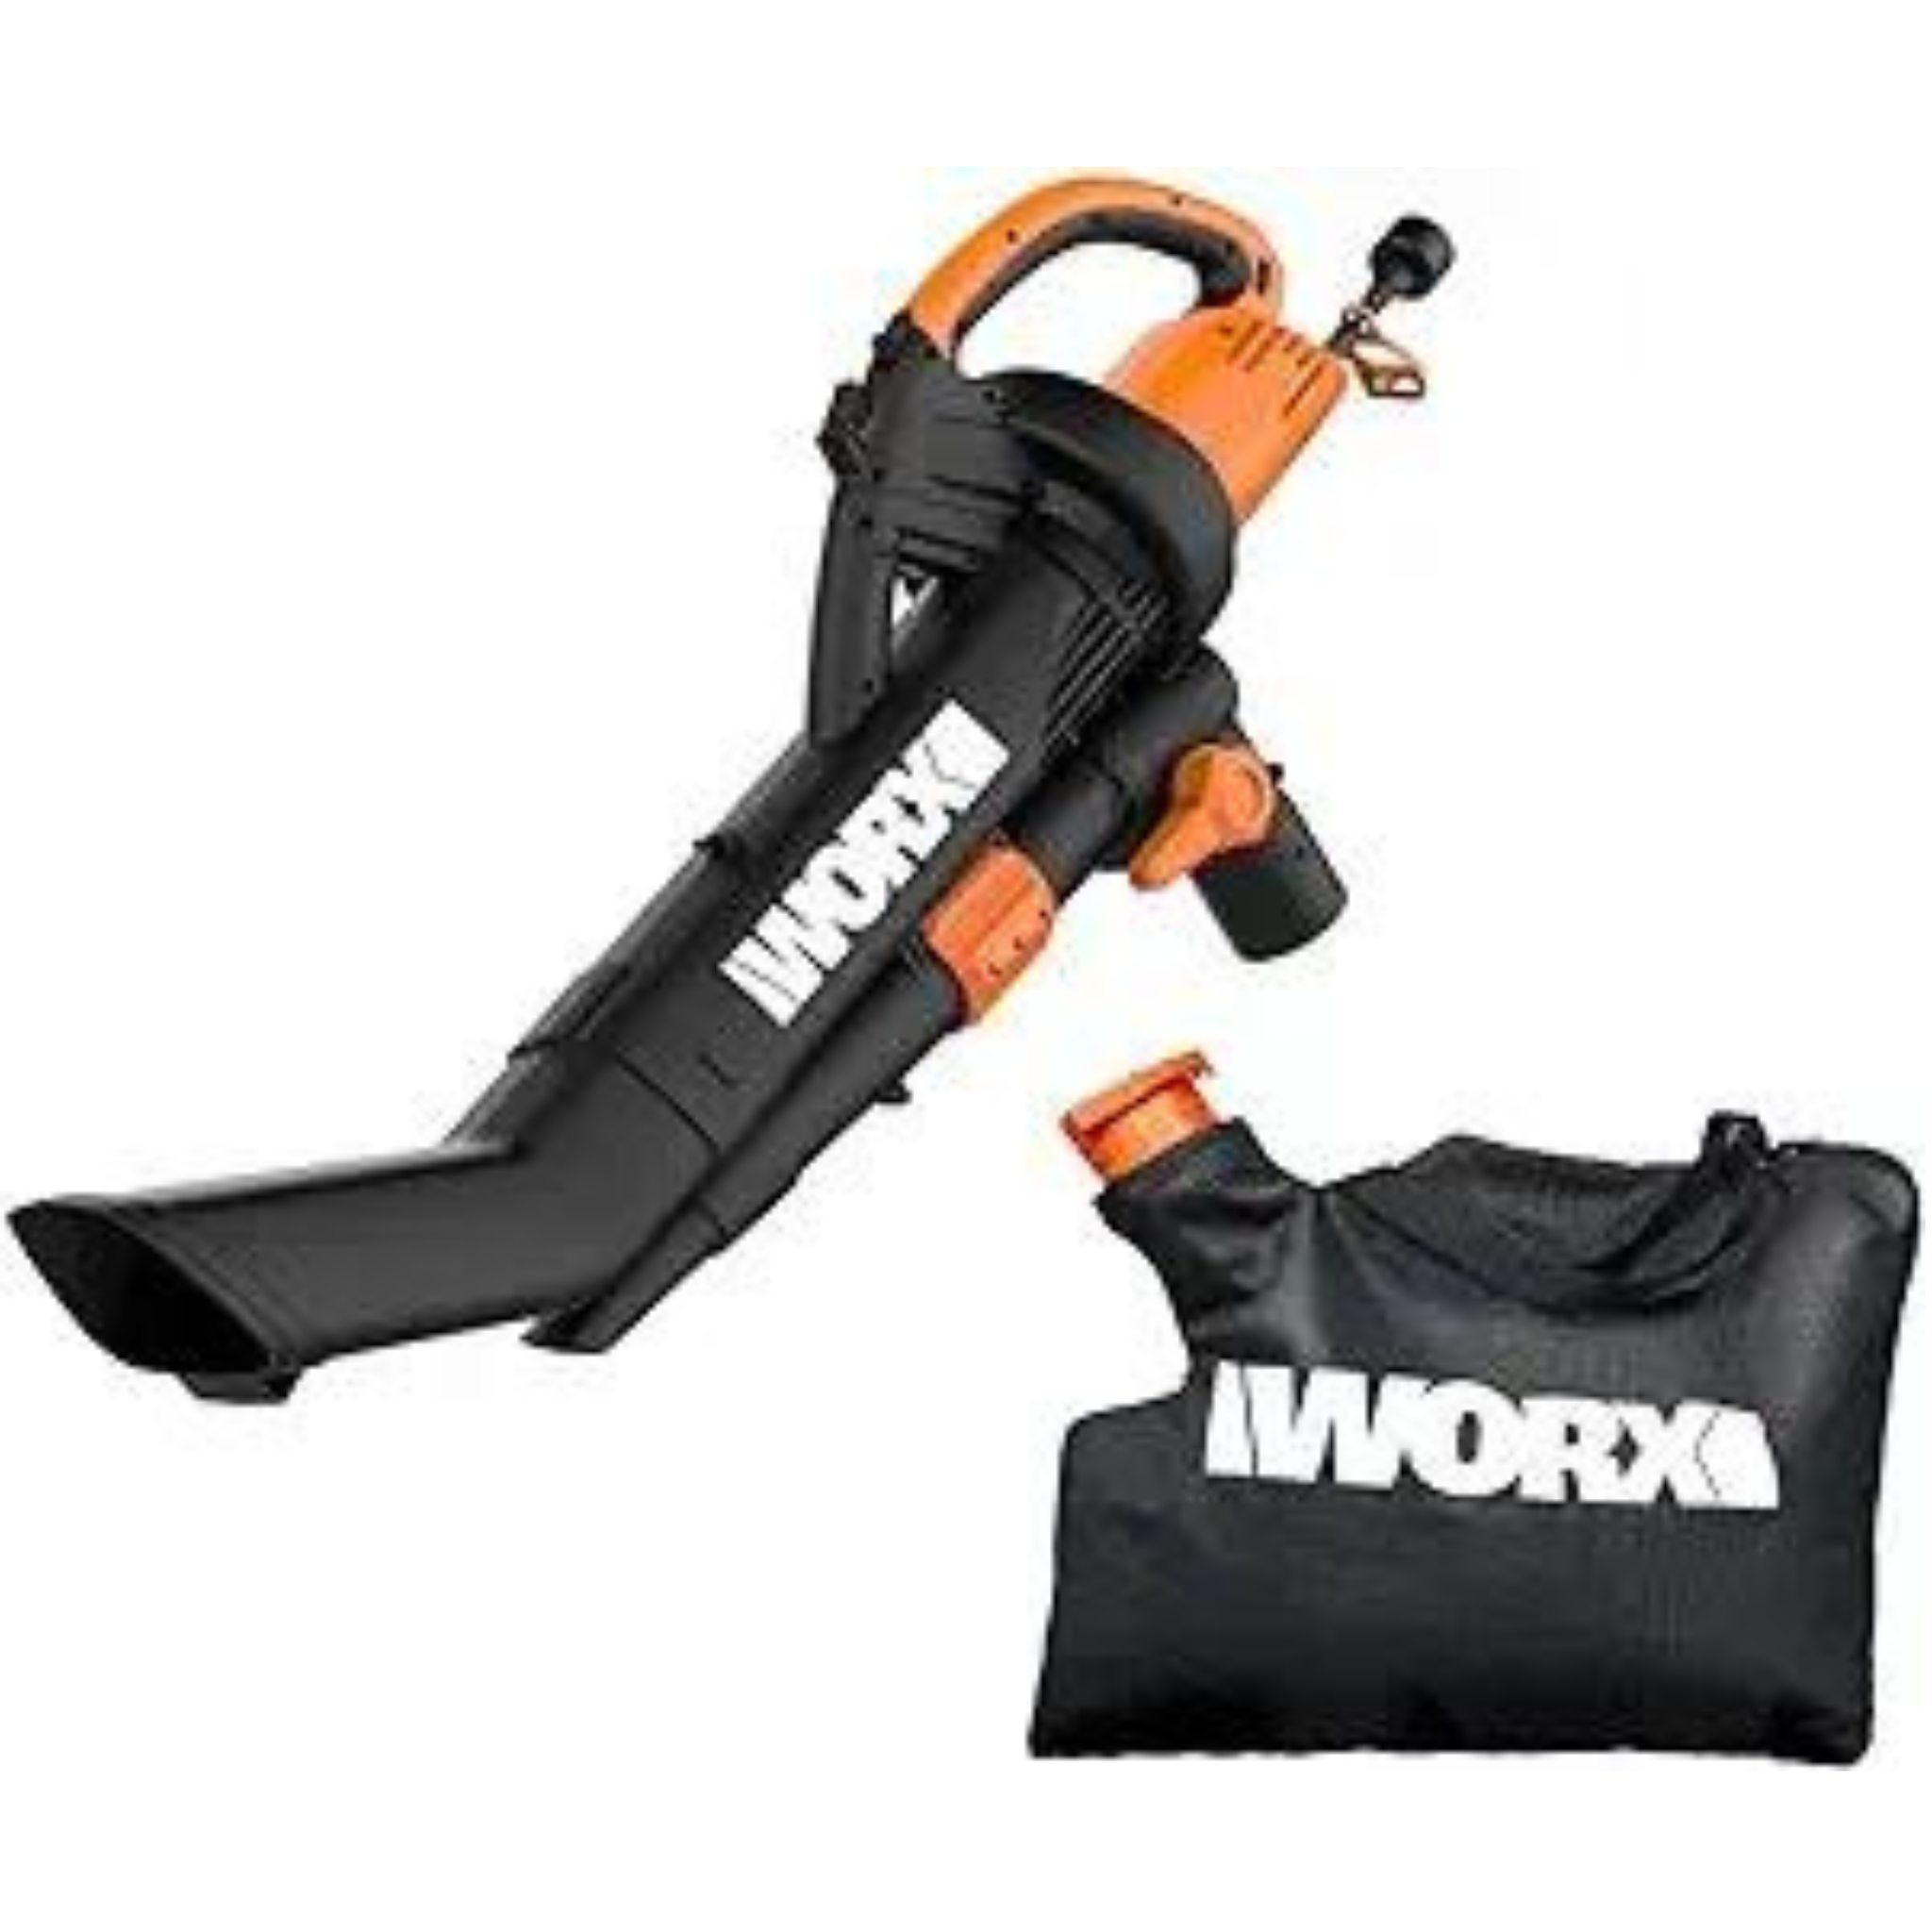 Worx 3-in-1 Electric Leaf Blower/Mulcher/Vacuum with Debris Collection Bag